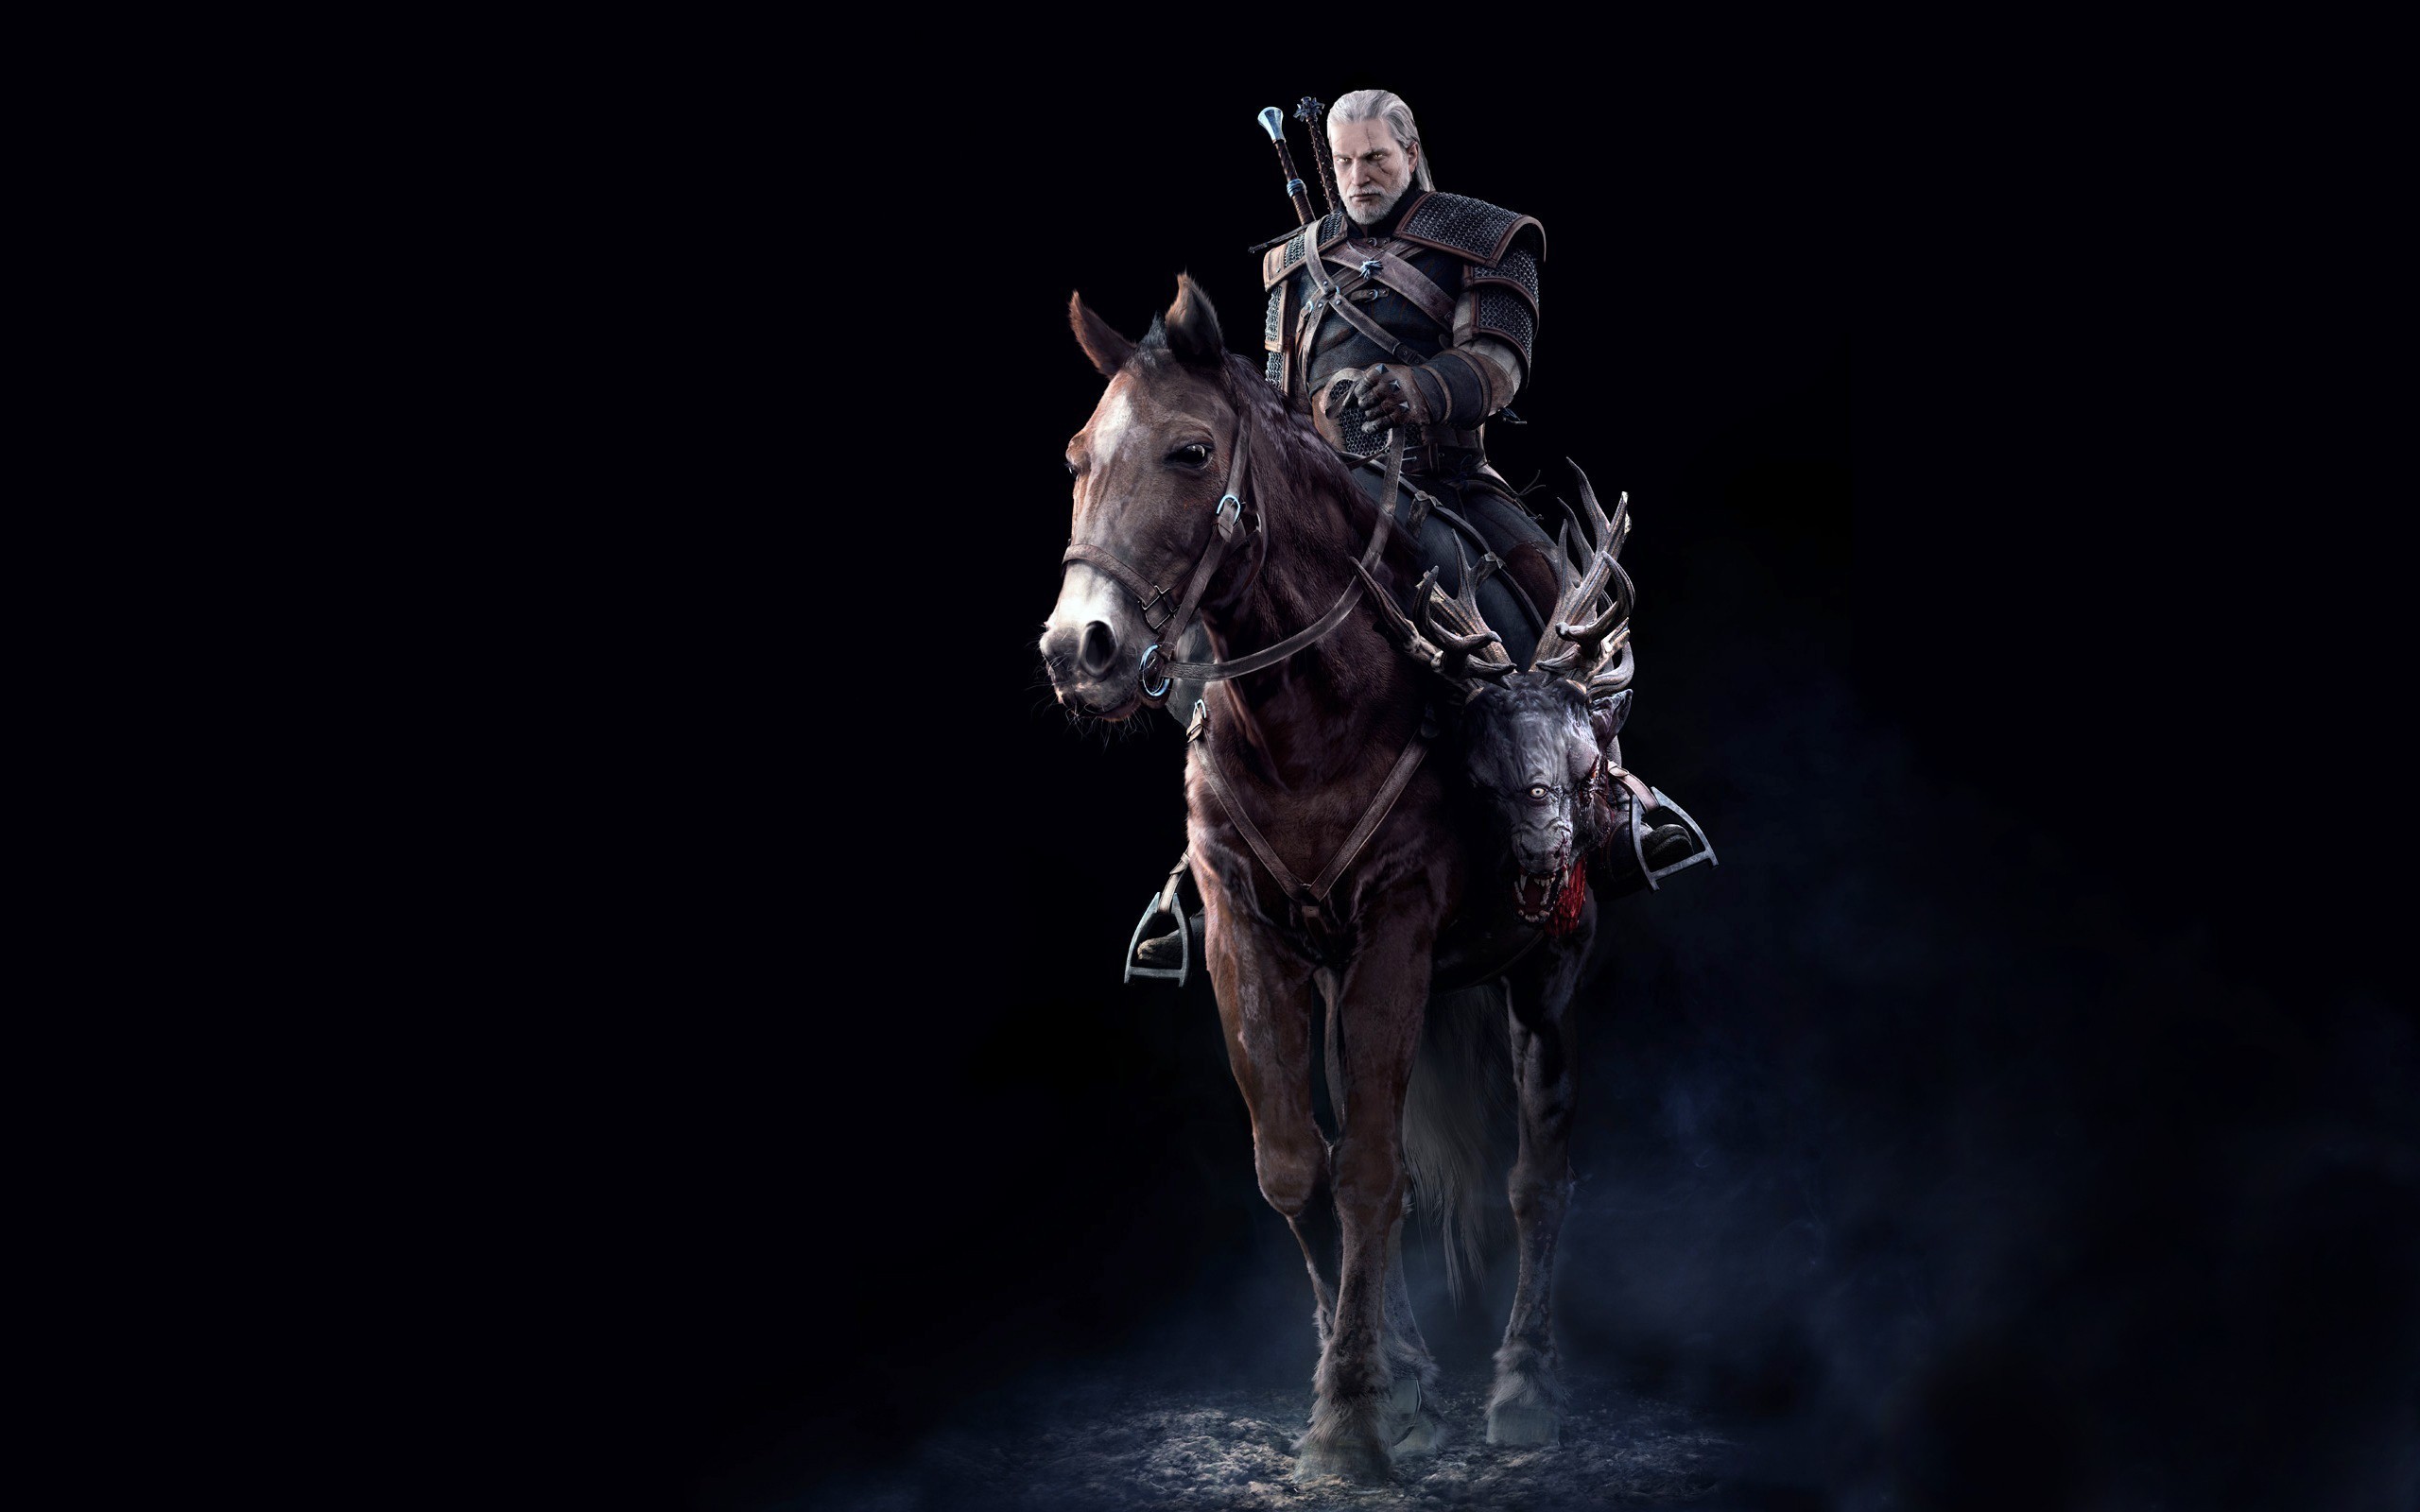 General 2560x1600 The Witcher 3: Wild Hunt video games The Witcher Geralt of Rivia Płotka (horse) RPG PC gaming horse fantasy men video game art